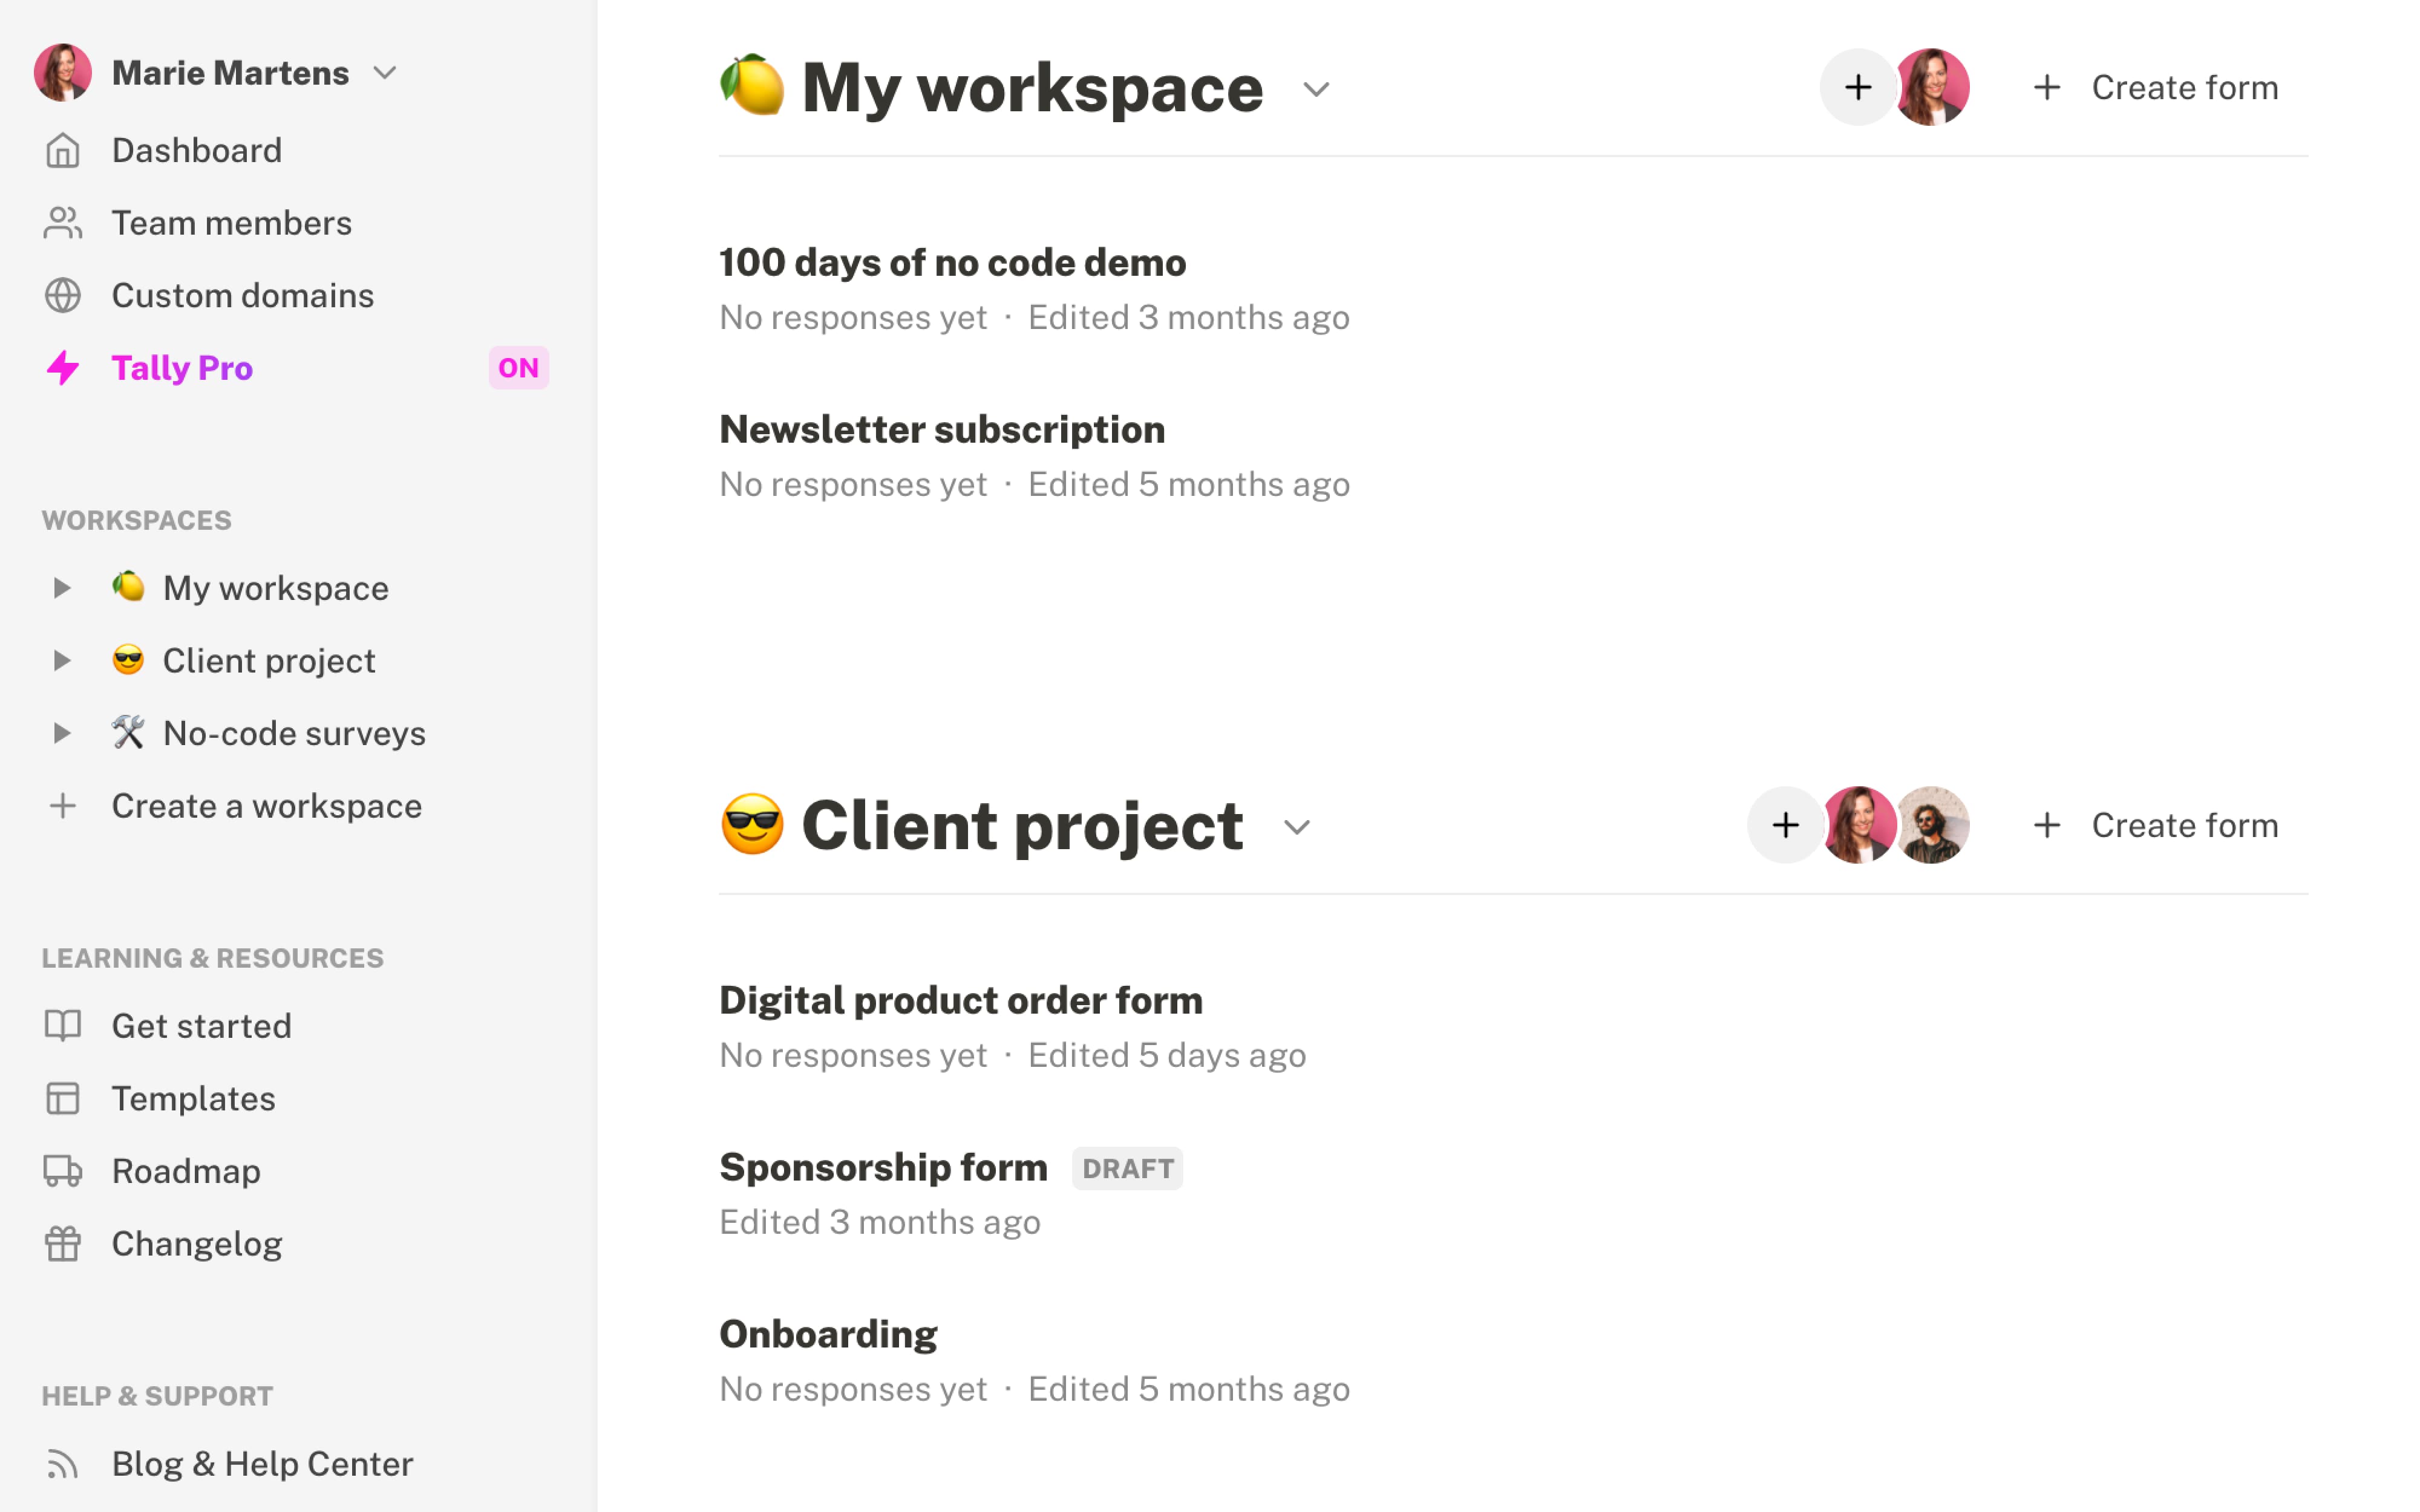 Organize forms in workspaces, collaborate with your team and manage access rights.